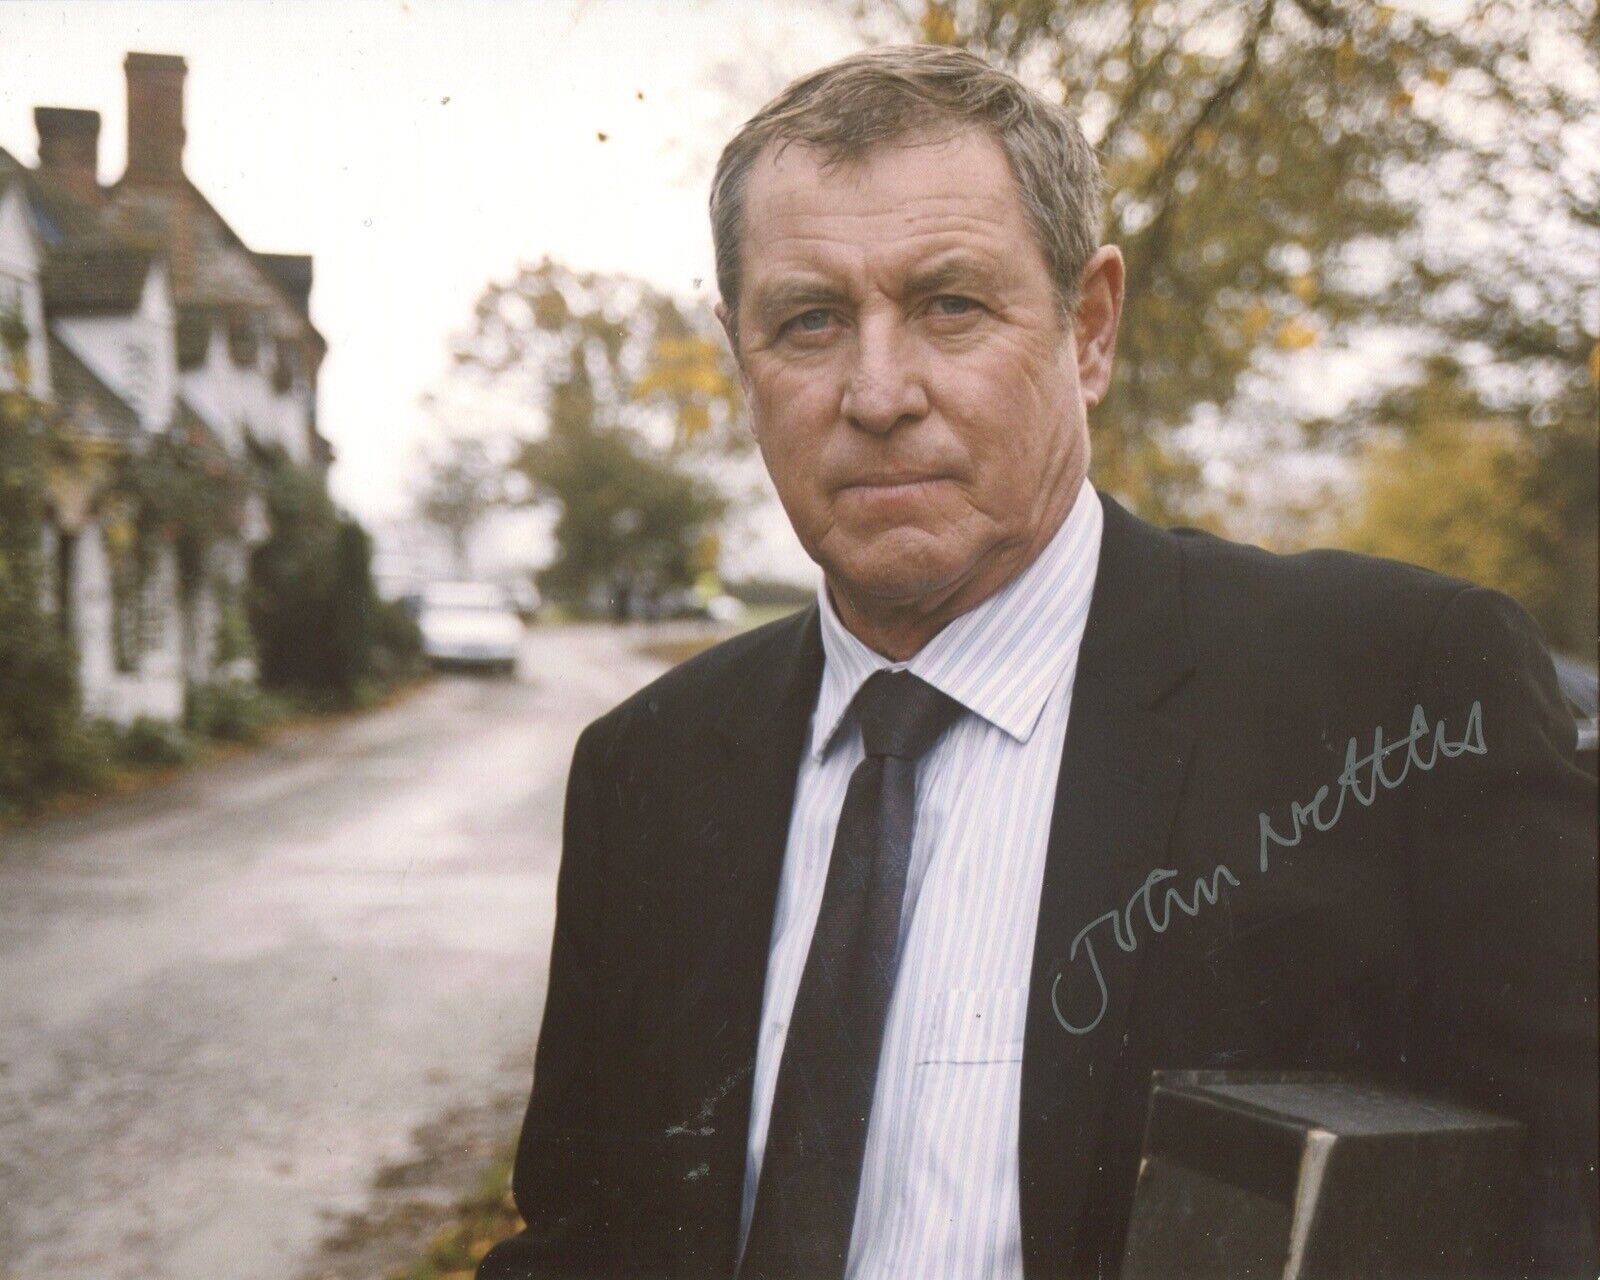 Midsomer Murders 8x10 TV detective Photo Poster painting signed by actor John Nettles IMAGE No4